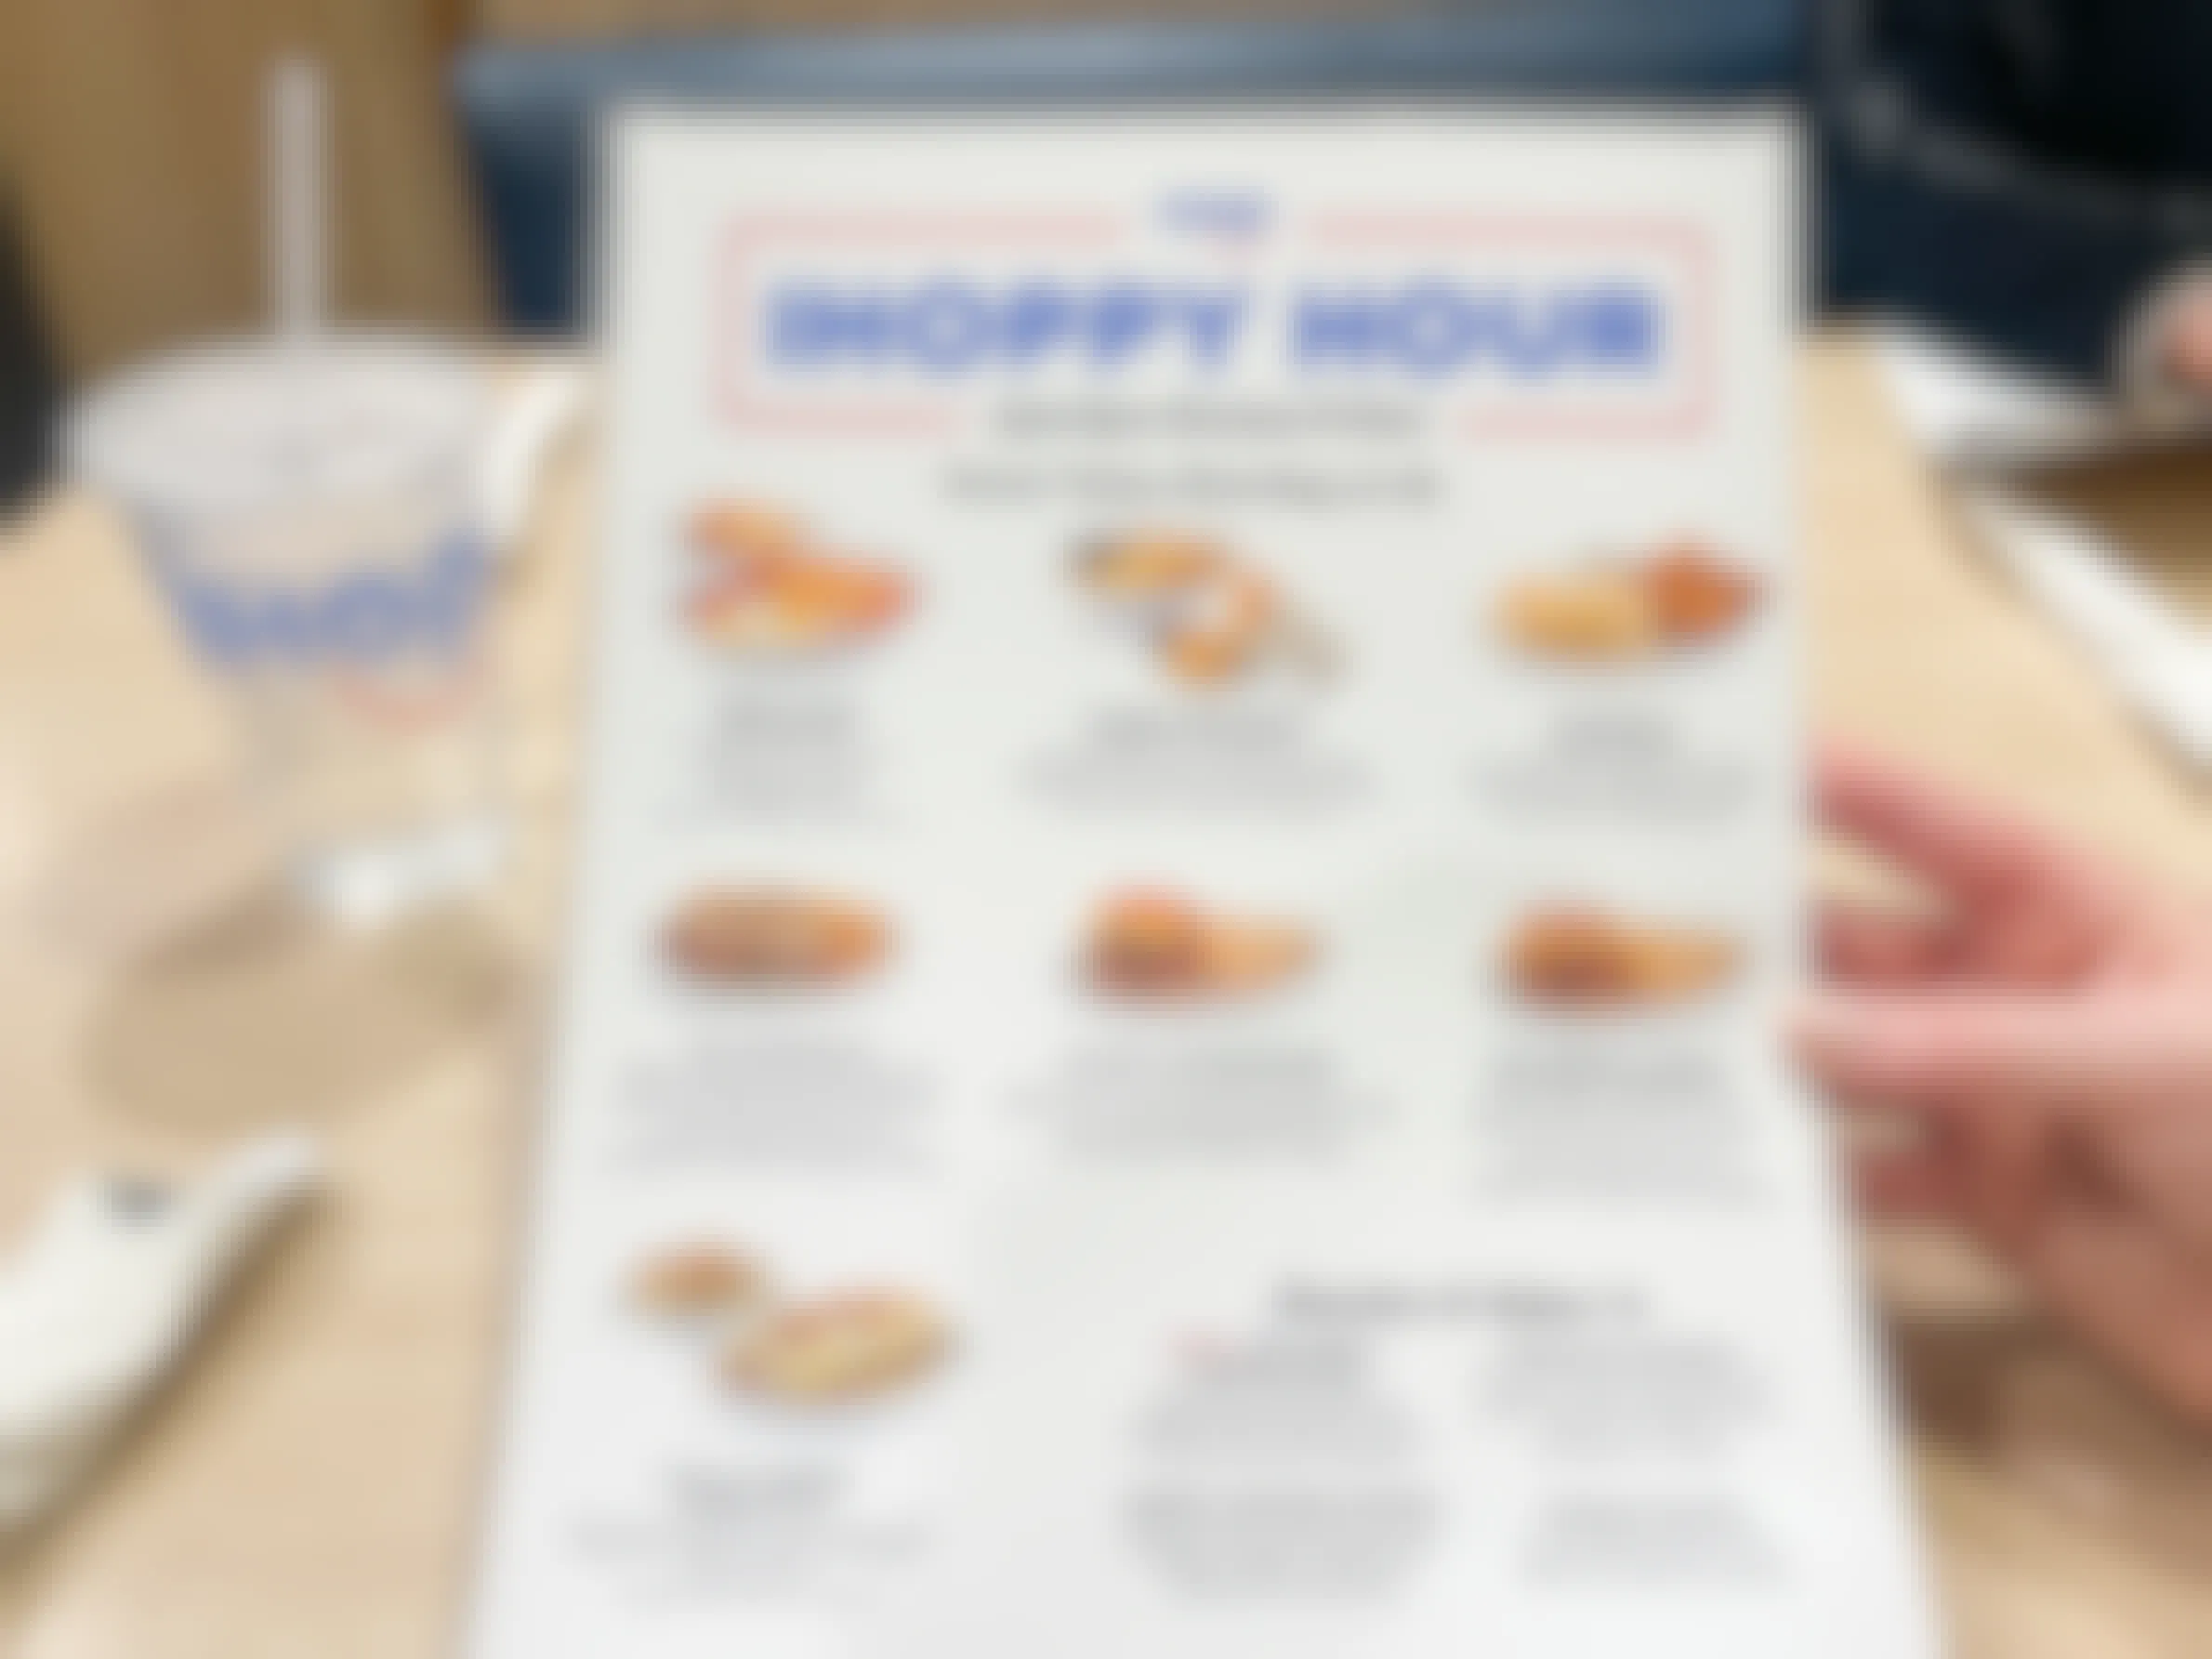 The IHOP IHOPPY HOUR menu showing the available specials